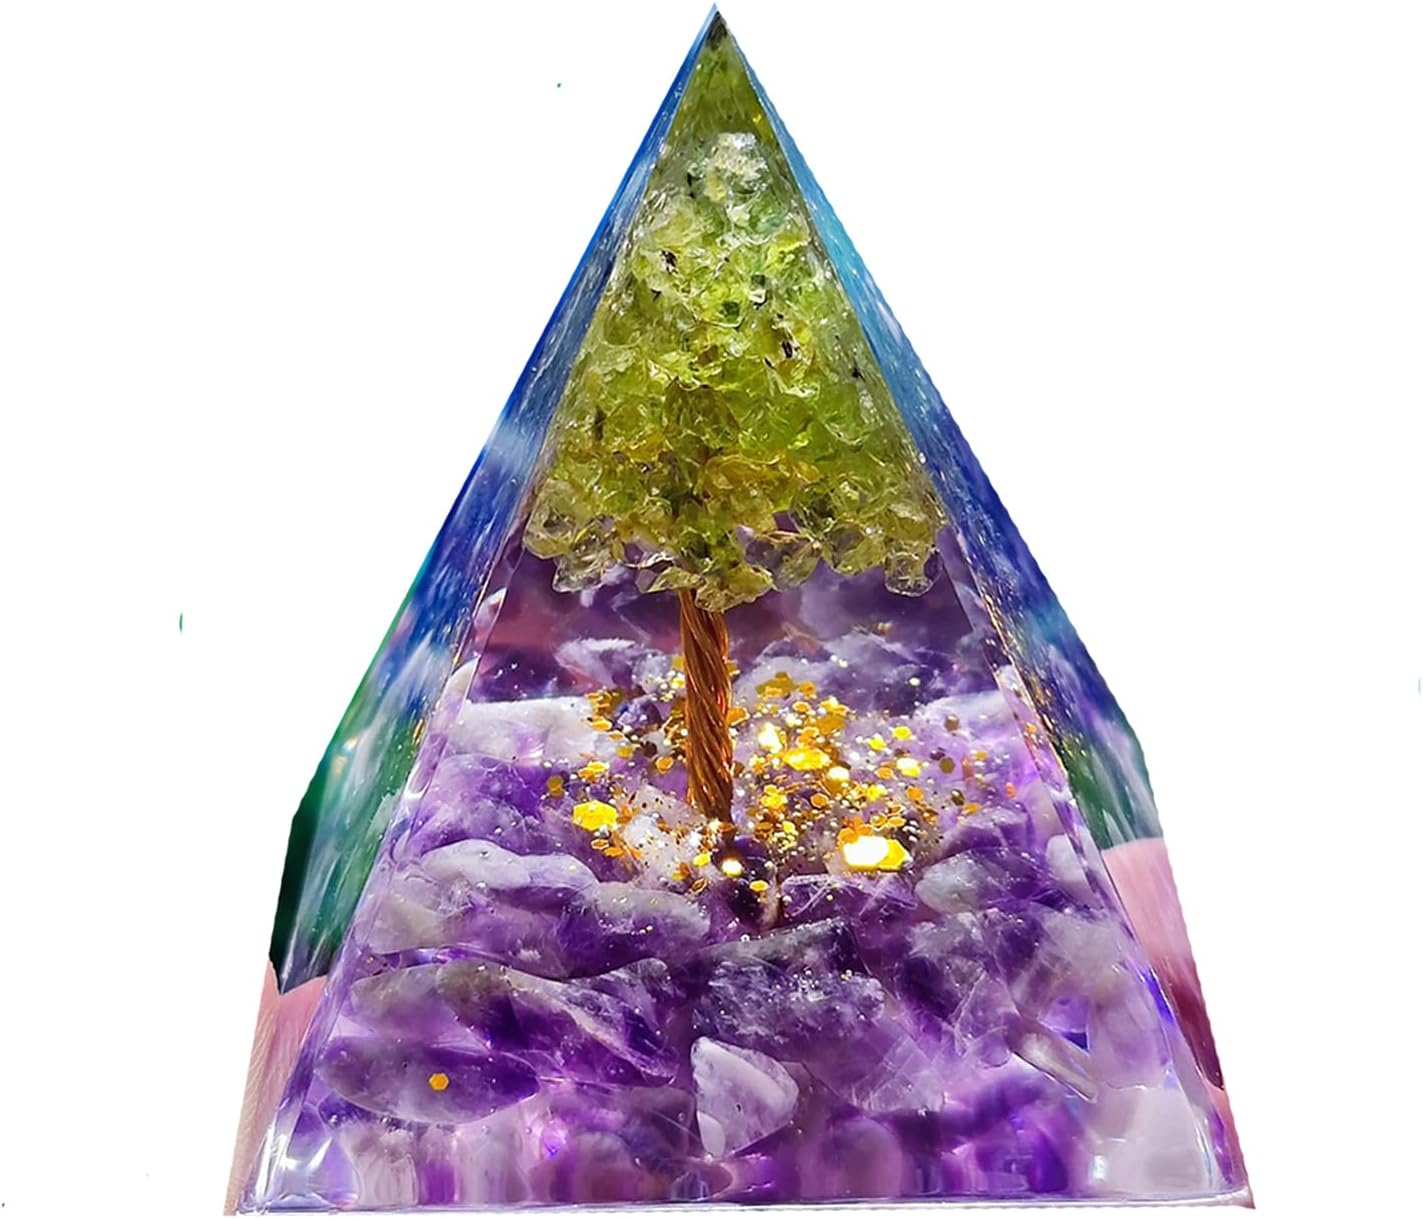 Small Life Tree Natural Crystal Pyramid - Clear Crystal, 5cm - Unique Gift for Men and Women, Positive Energy Generator Pyramid Protection Therapeutic Meditation Chakra Balance